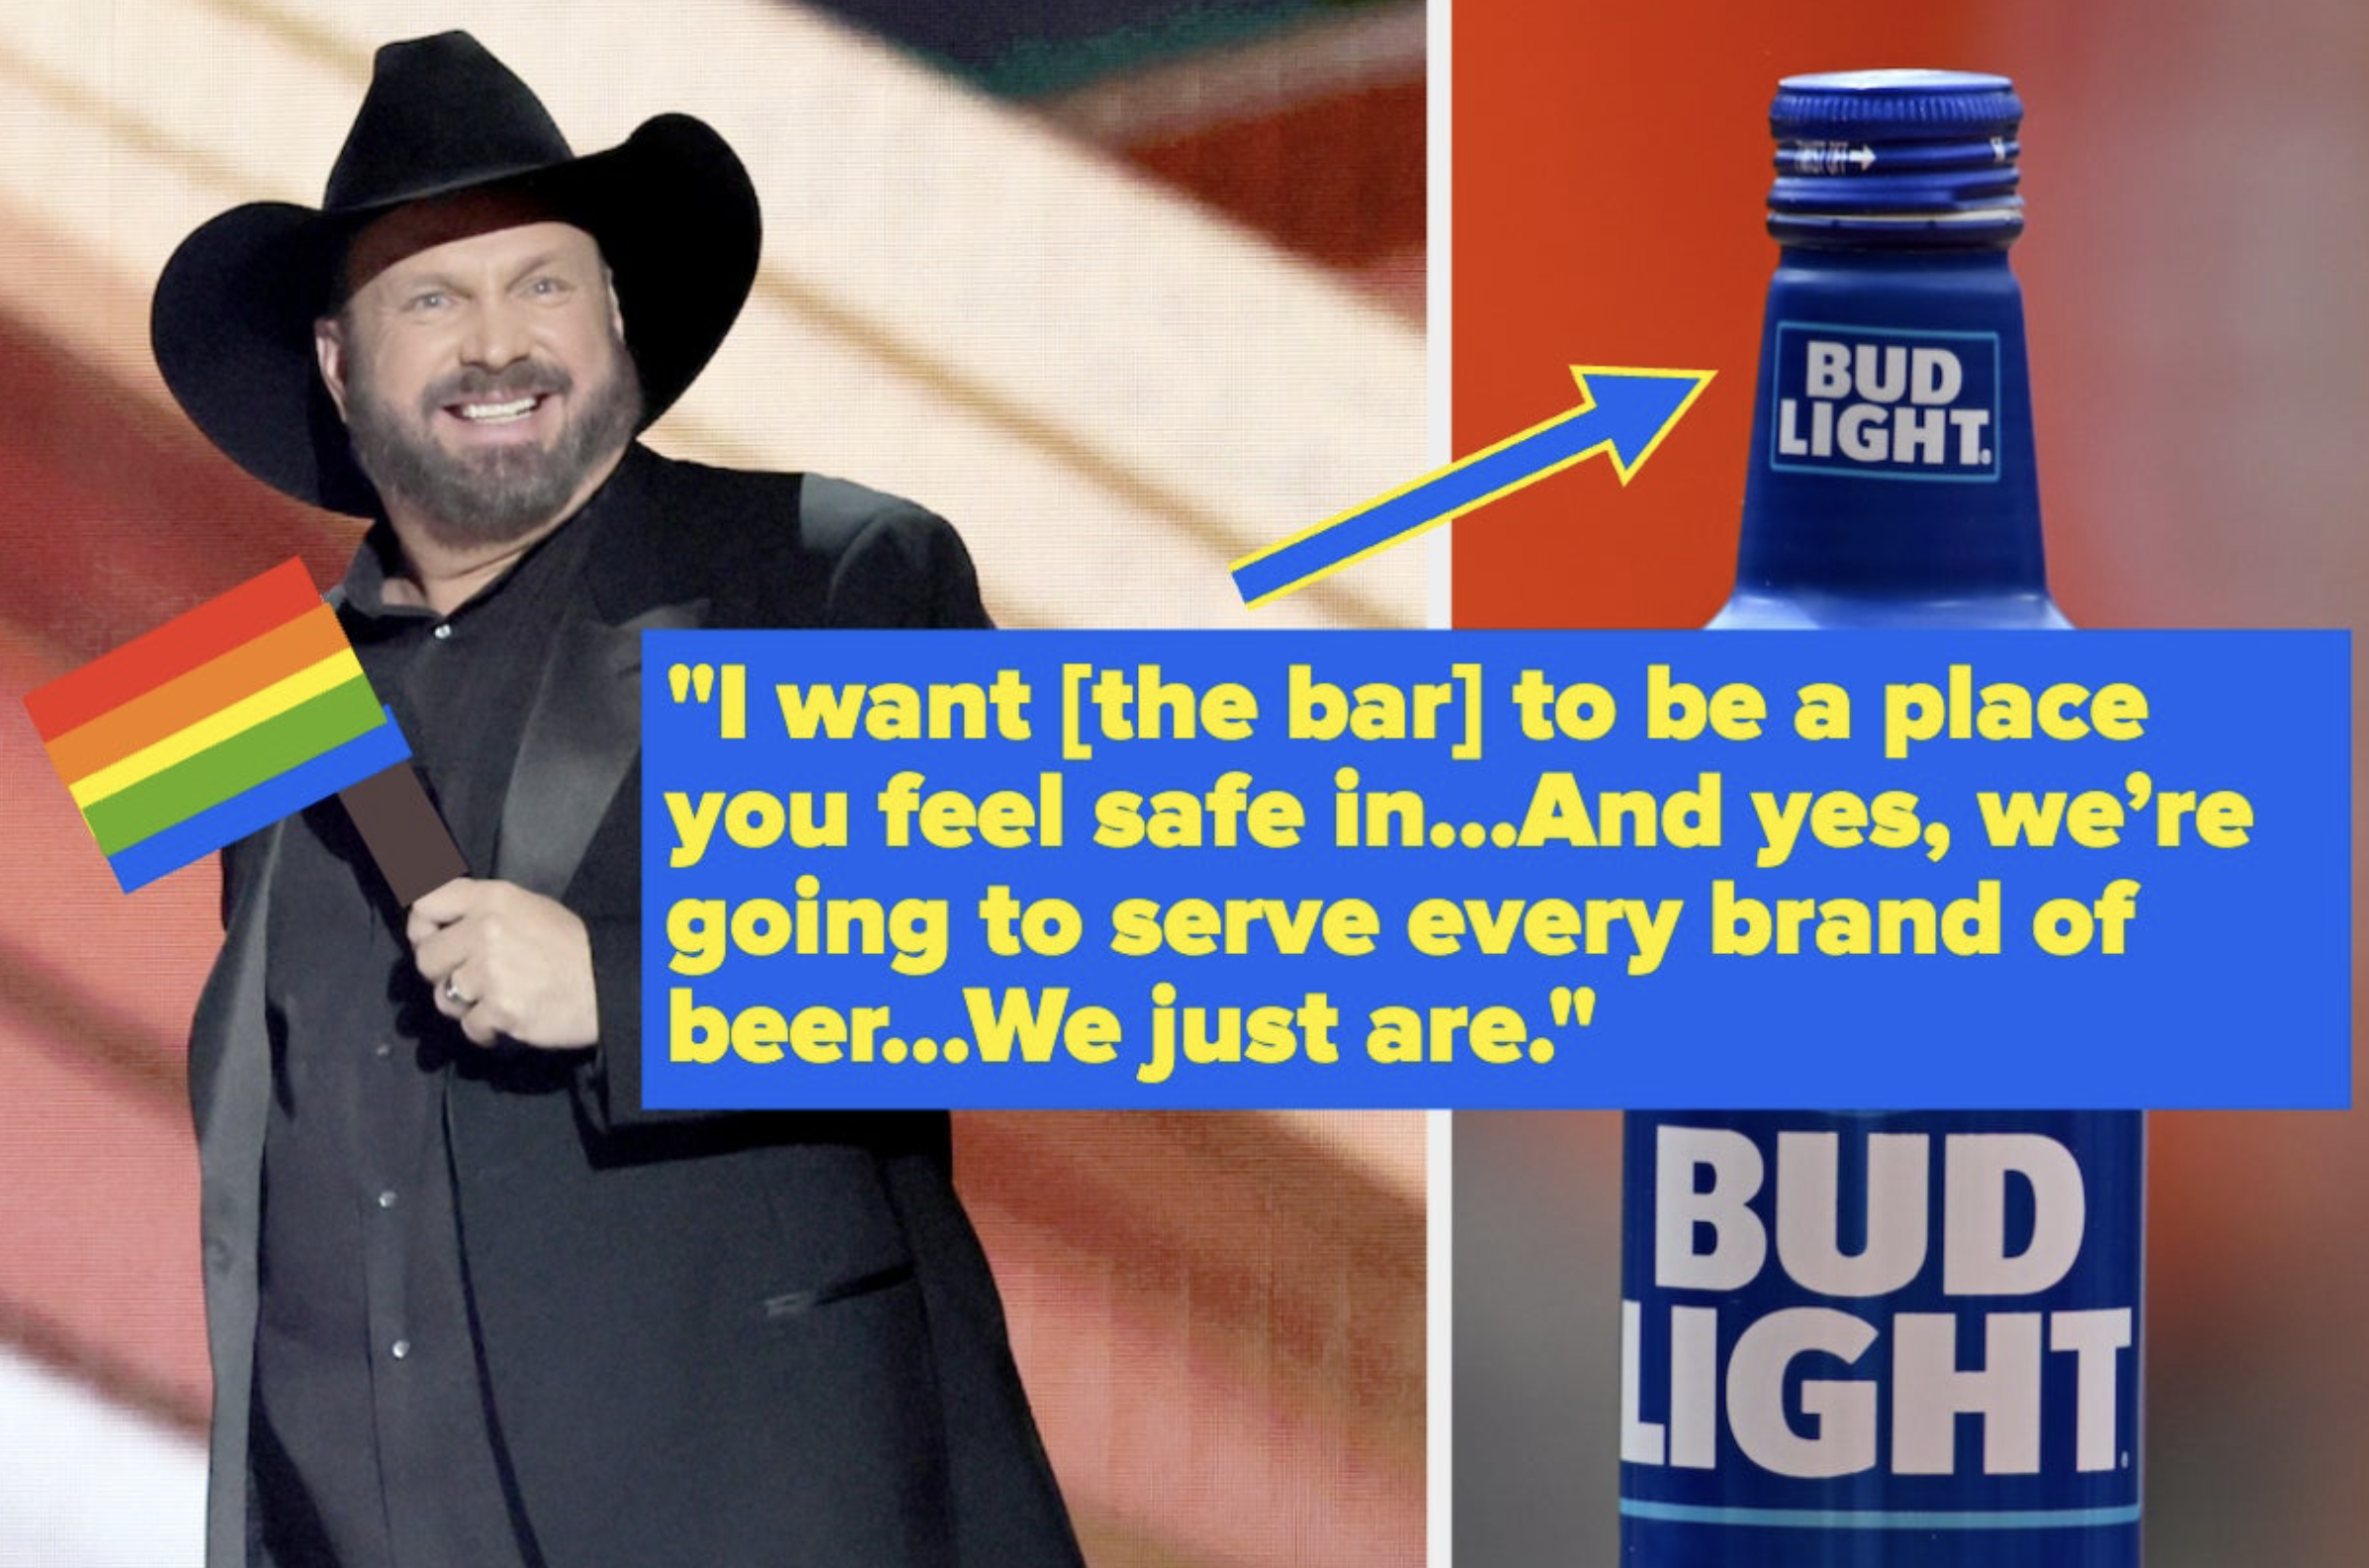 Garth Brooks rightly ditches the Royals for the Orioles - Camden Chat